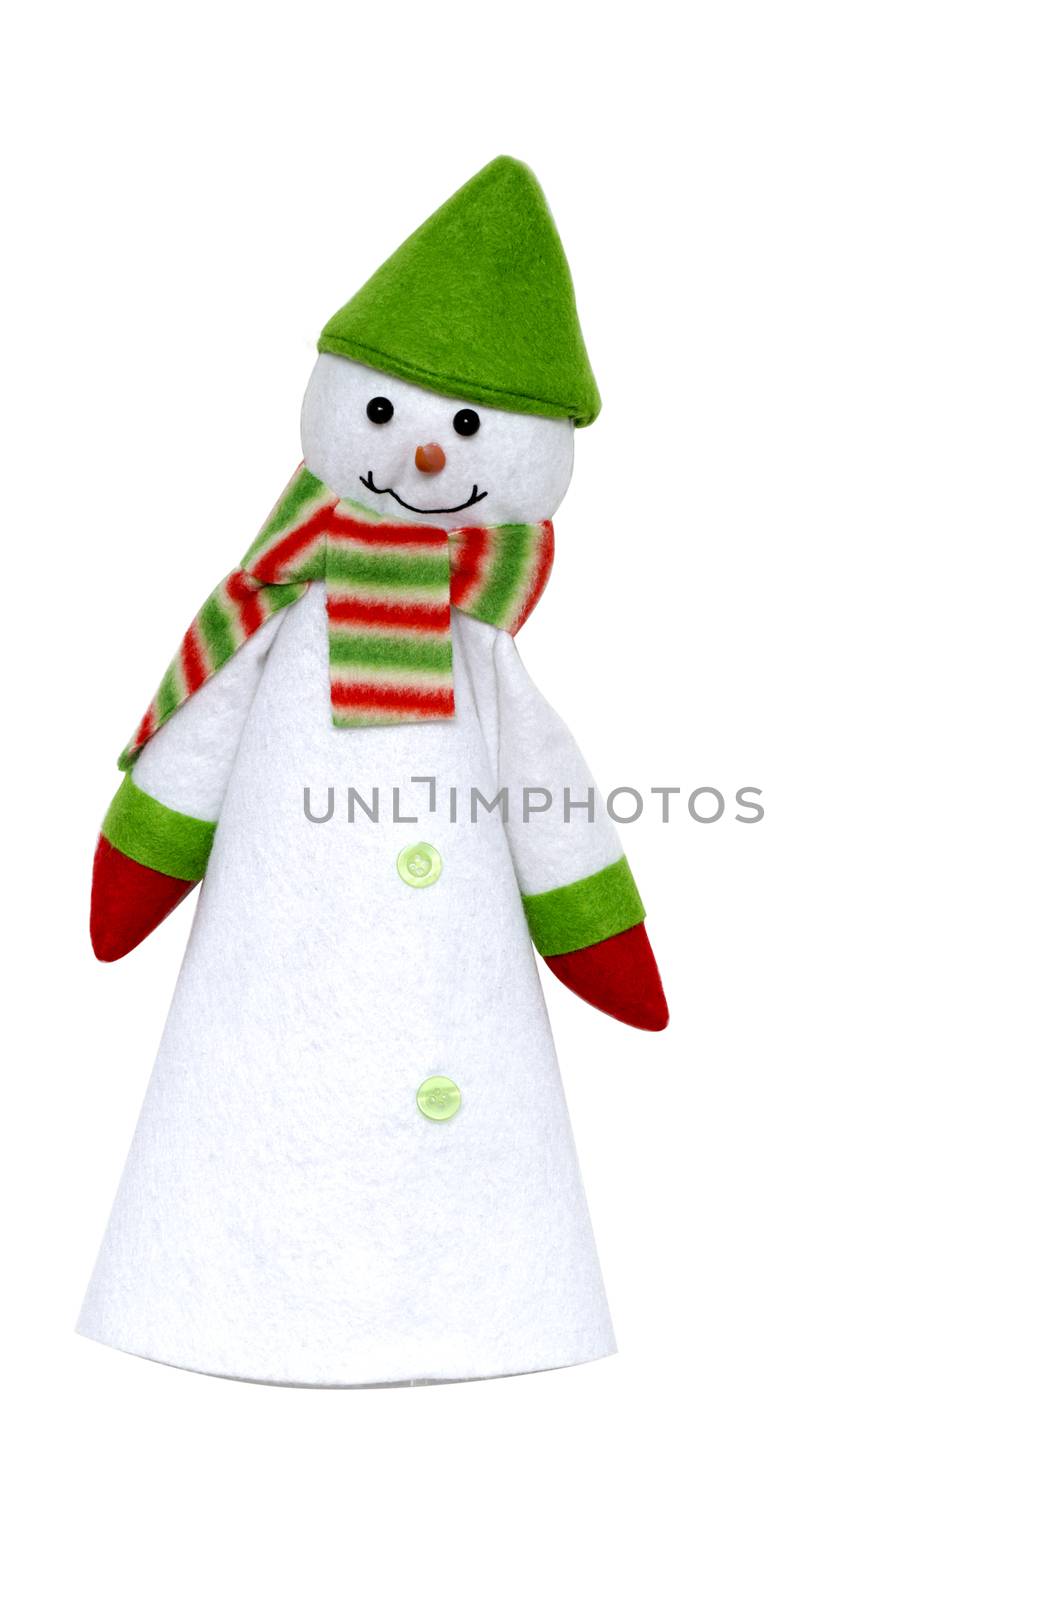 Smiling, kind snowman, soft toy for Christmas and New year